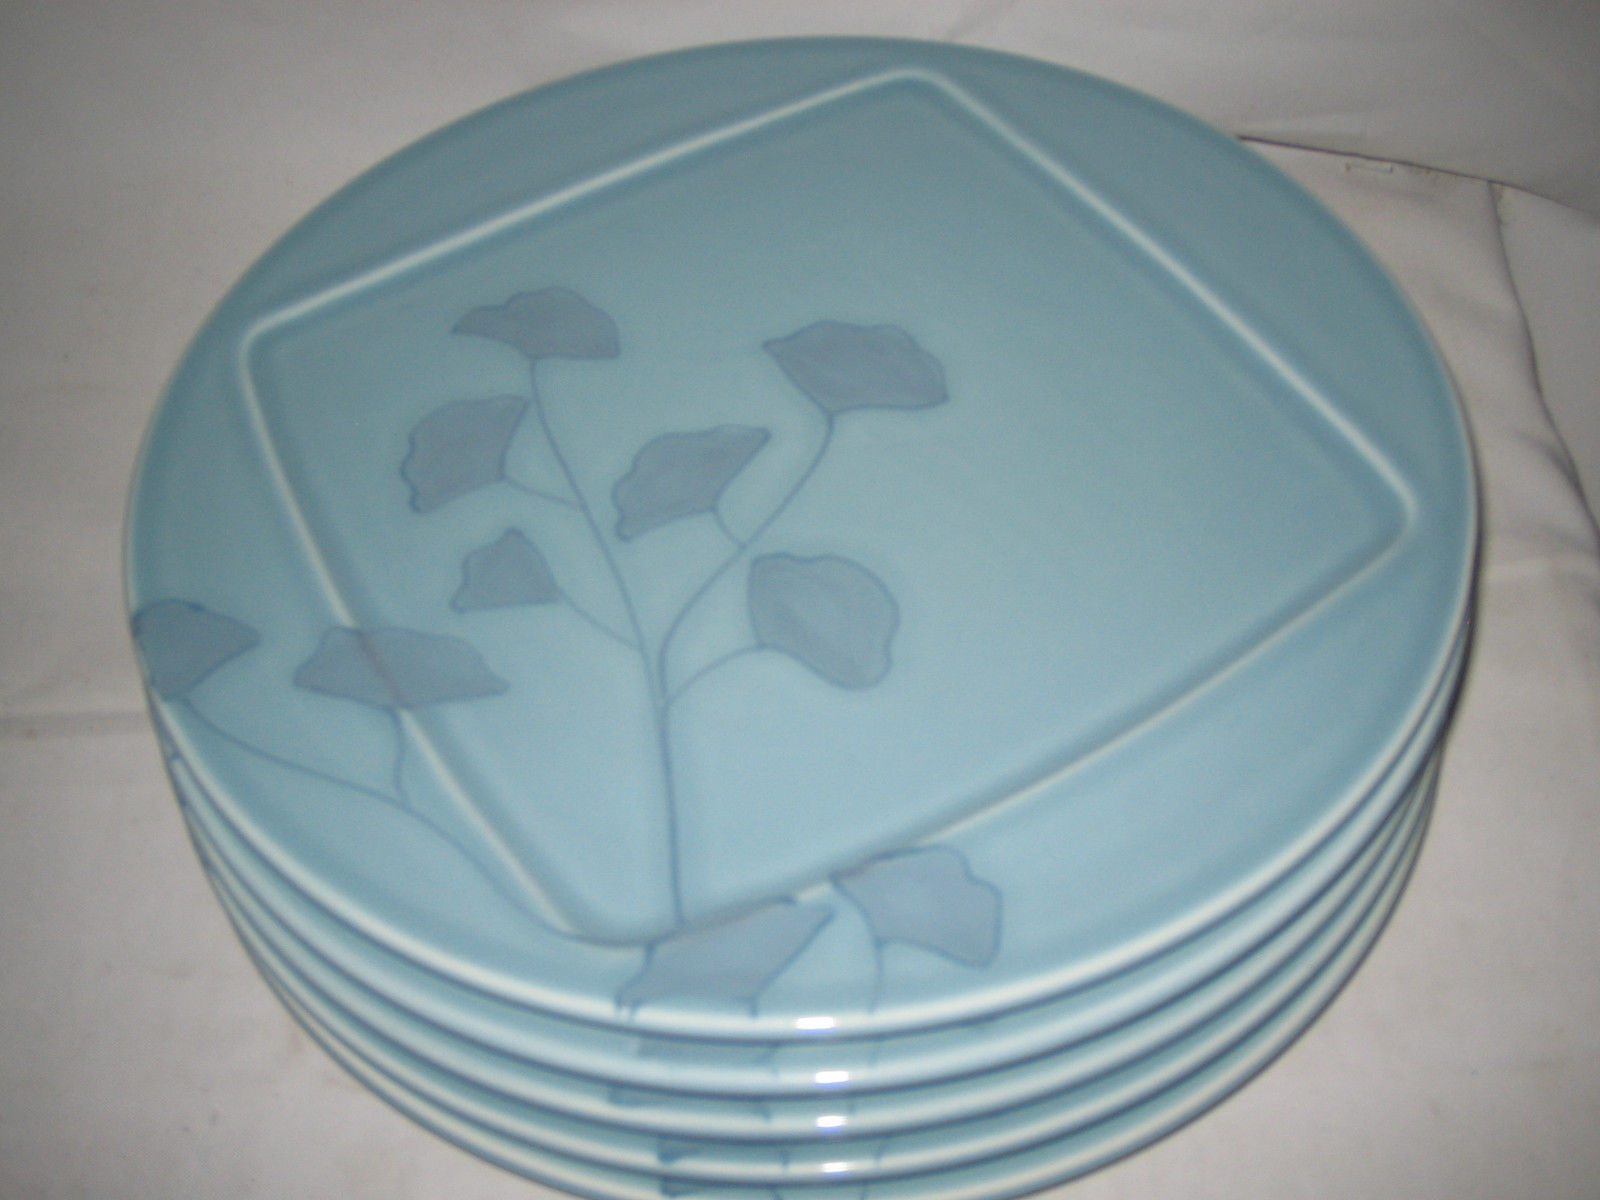 Primary image for 2 Pier 1 GINGKO Dinner Plates 11" Blue Flowers Earthenware Never Used Conditions